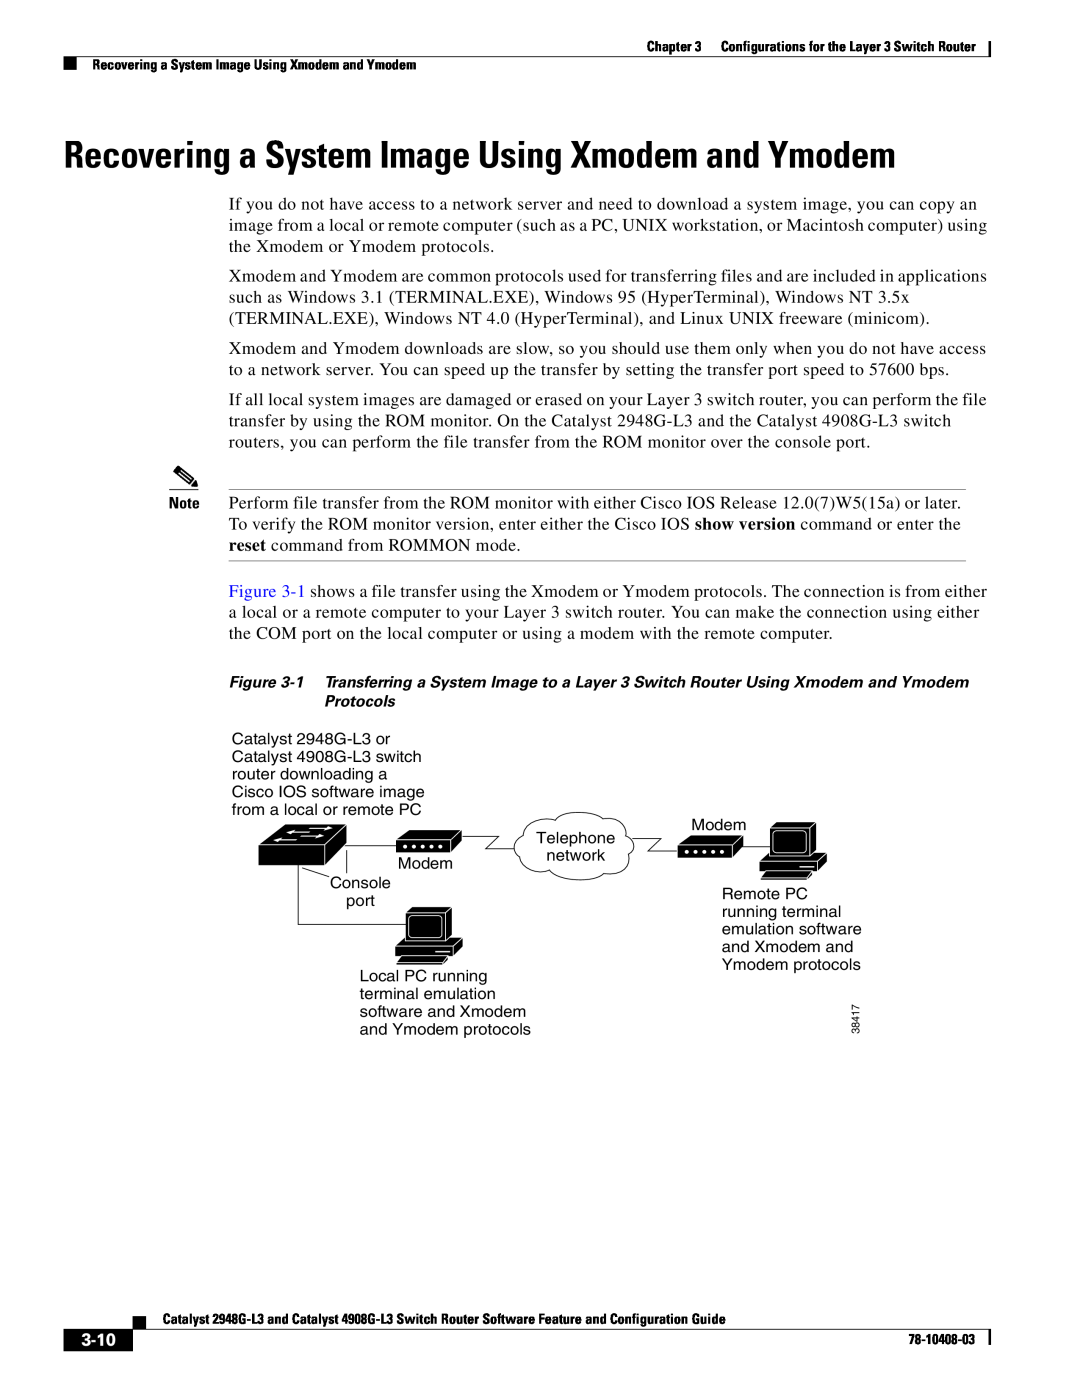 Cisco Systems 4908G-L3, 2948G-L3 manual 3-10, Recovering a System Image Using Xmodem and Ymodem 